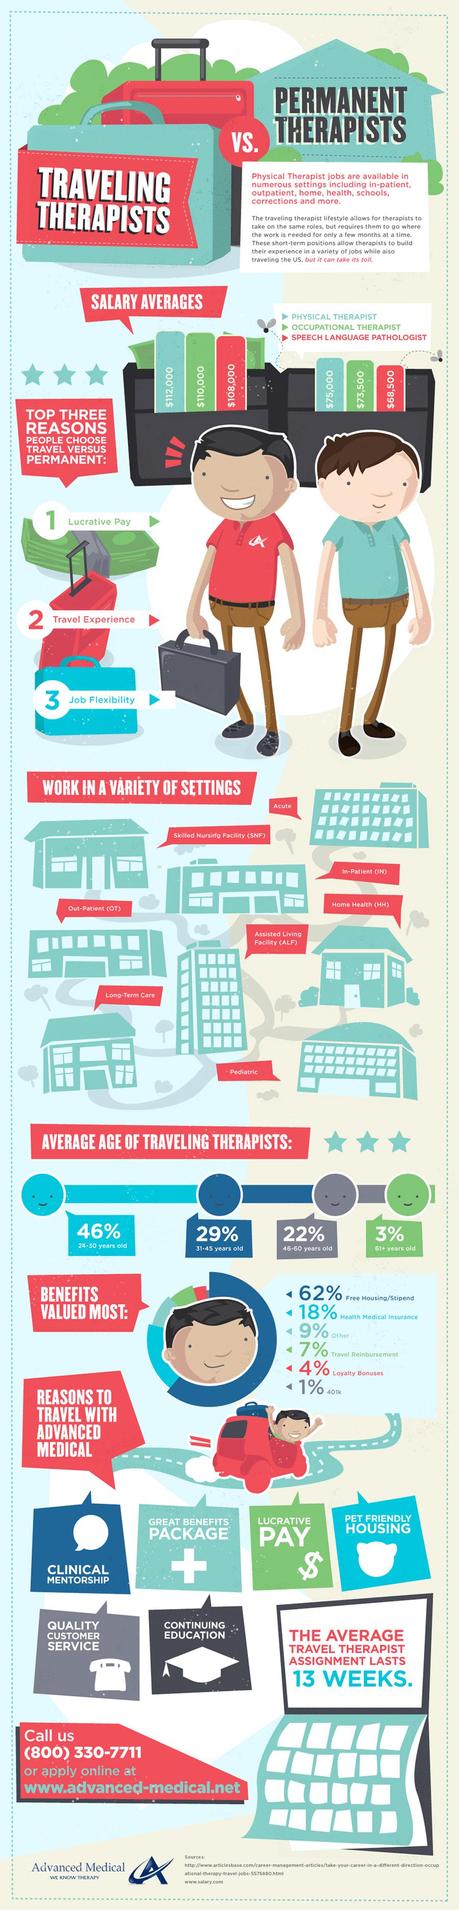 Travel Therapy Jobs vs Permanent Therapy Jobs